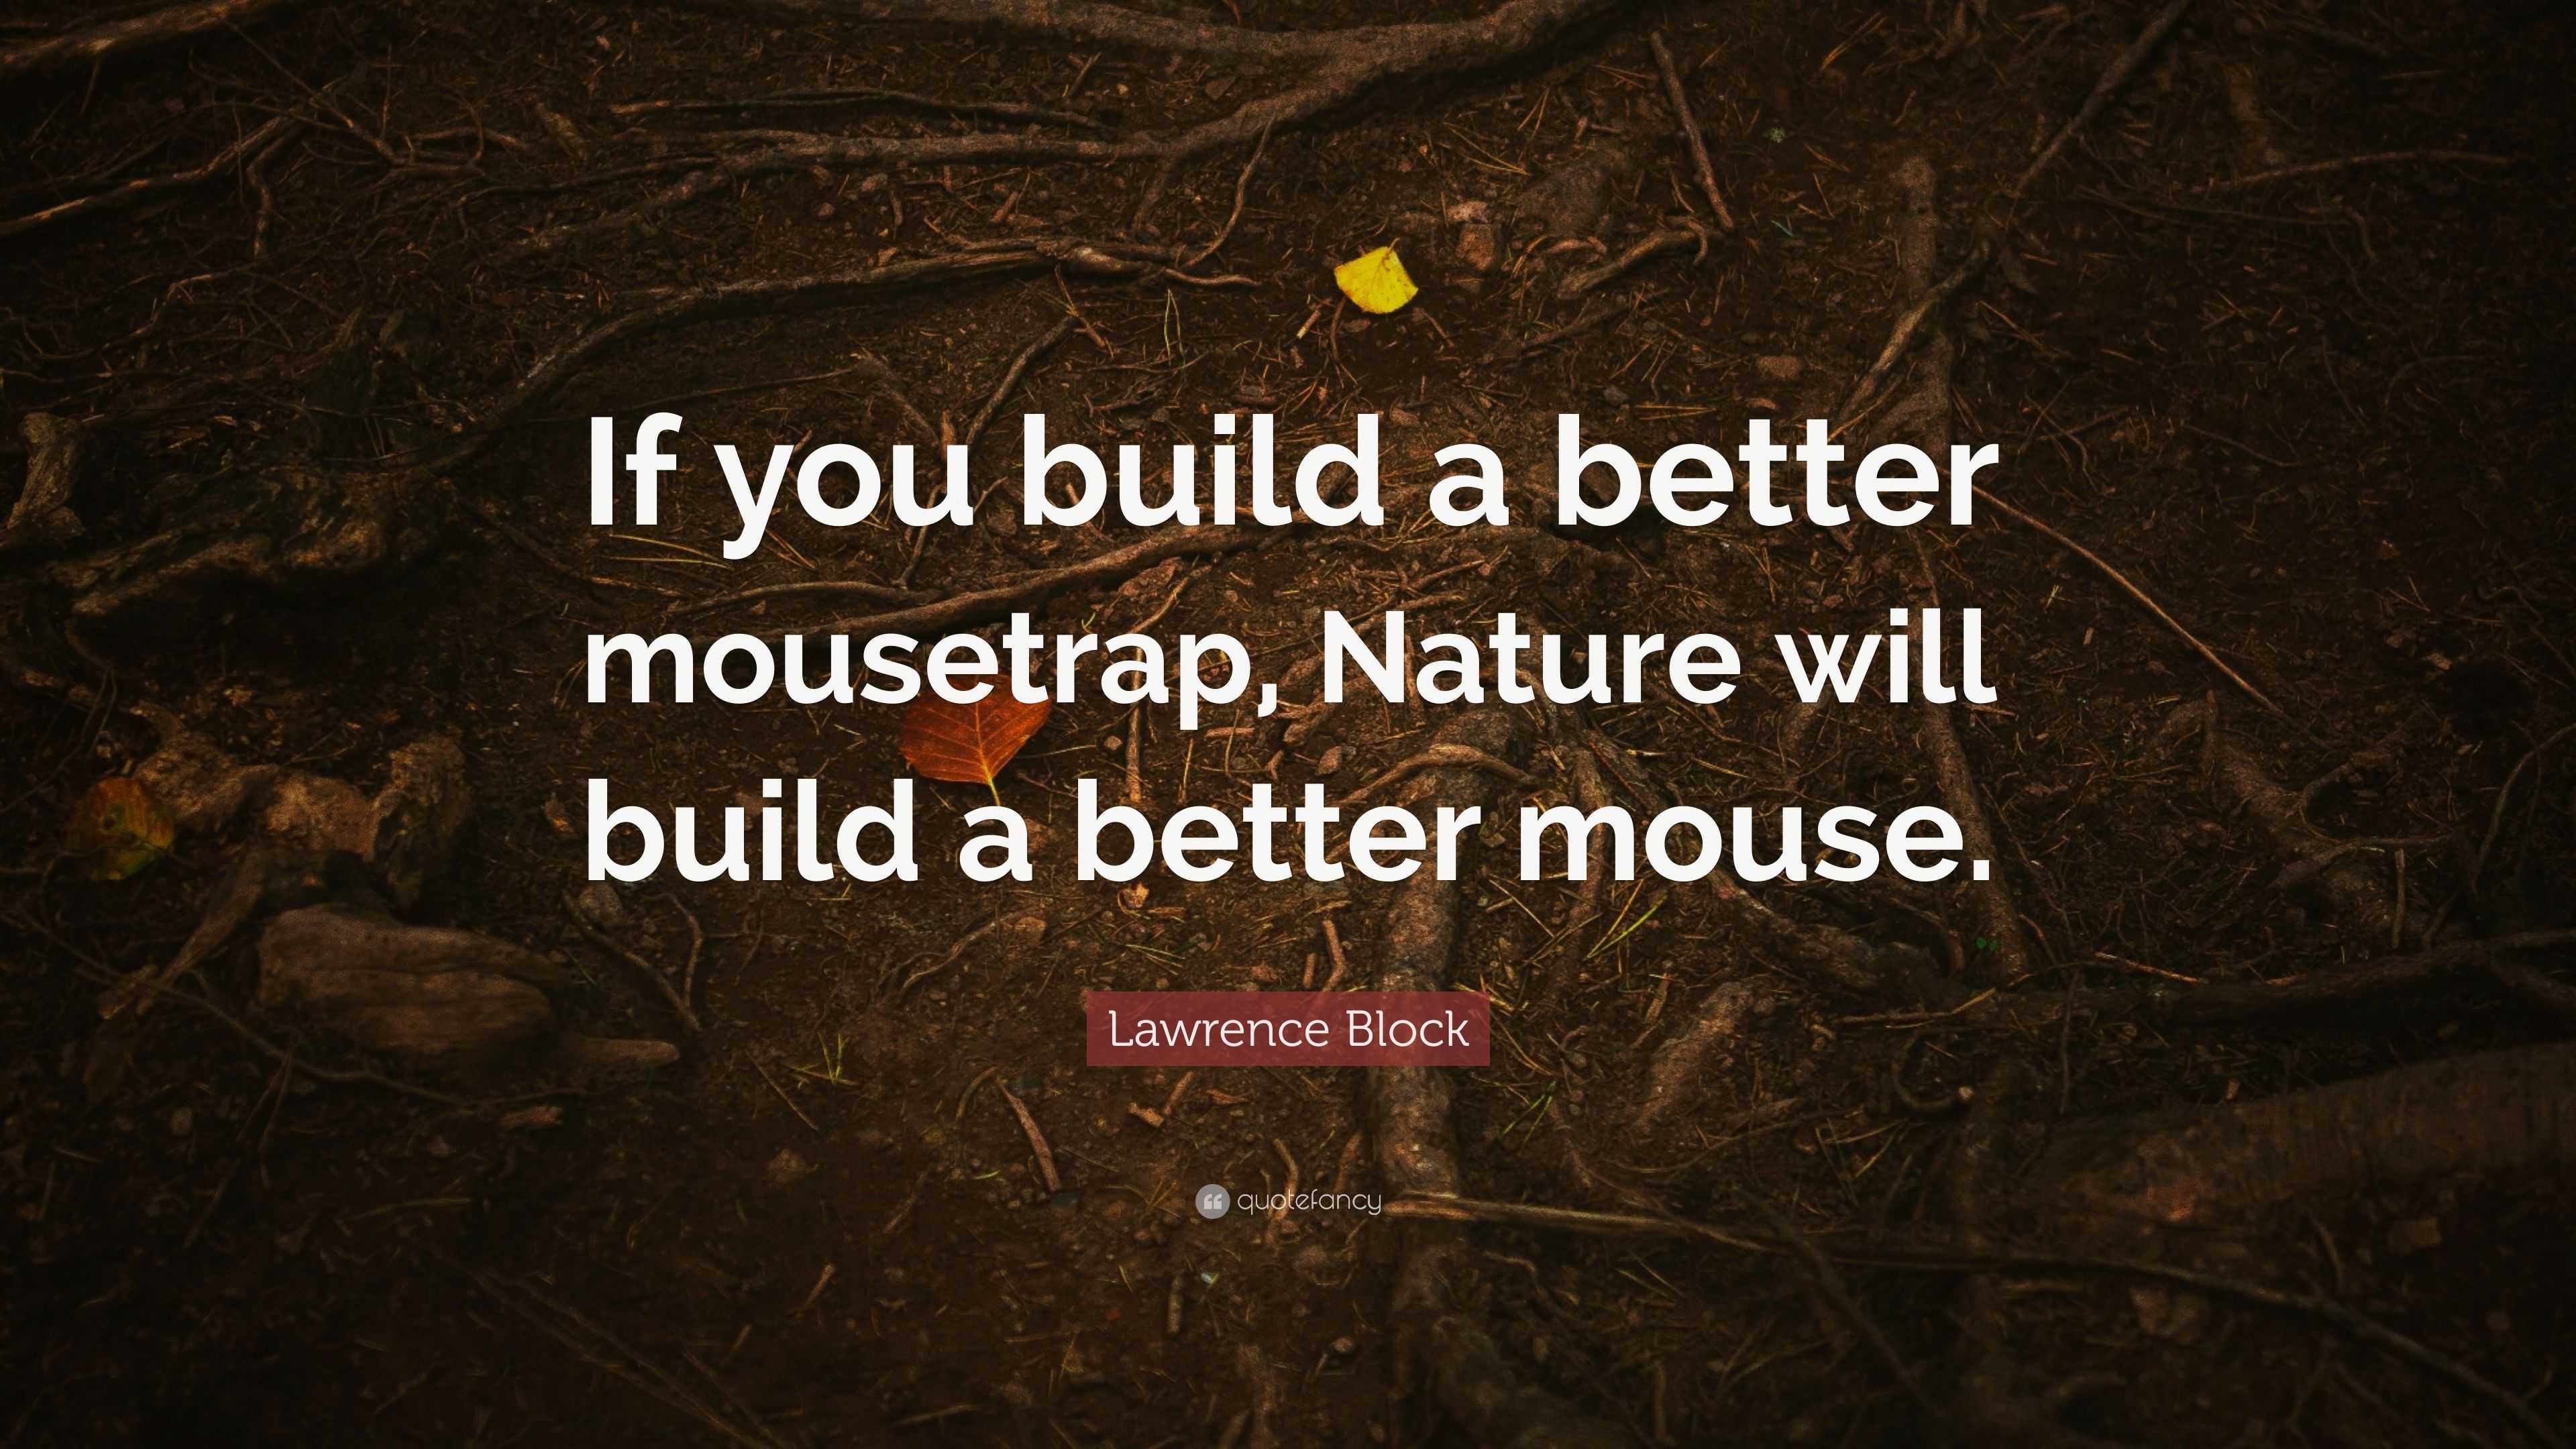 https://quotefancy.com/media/wallpaper/3840x2160/5287717-Lawrence-Block-Quote-If-you-build-a-better-mousetrap-Nature-will.jpg